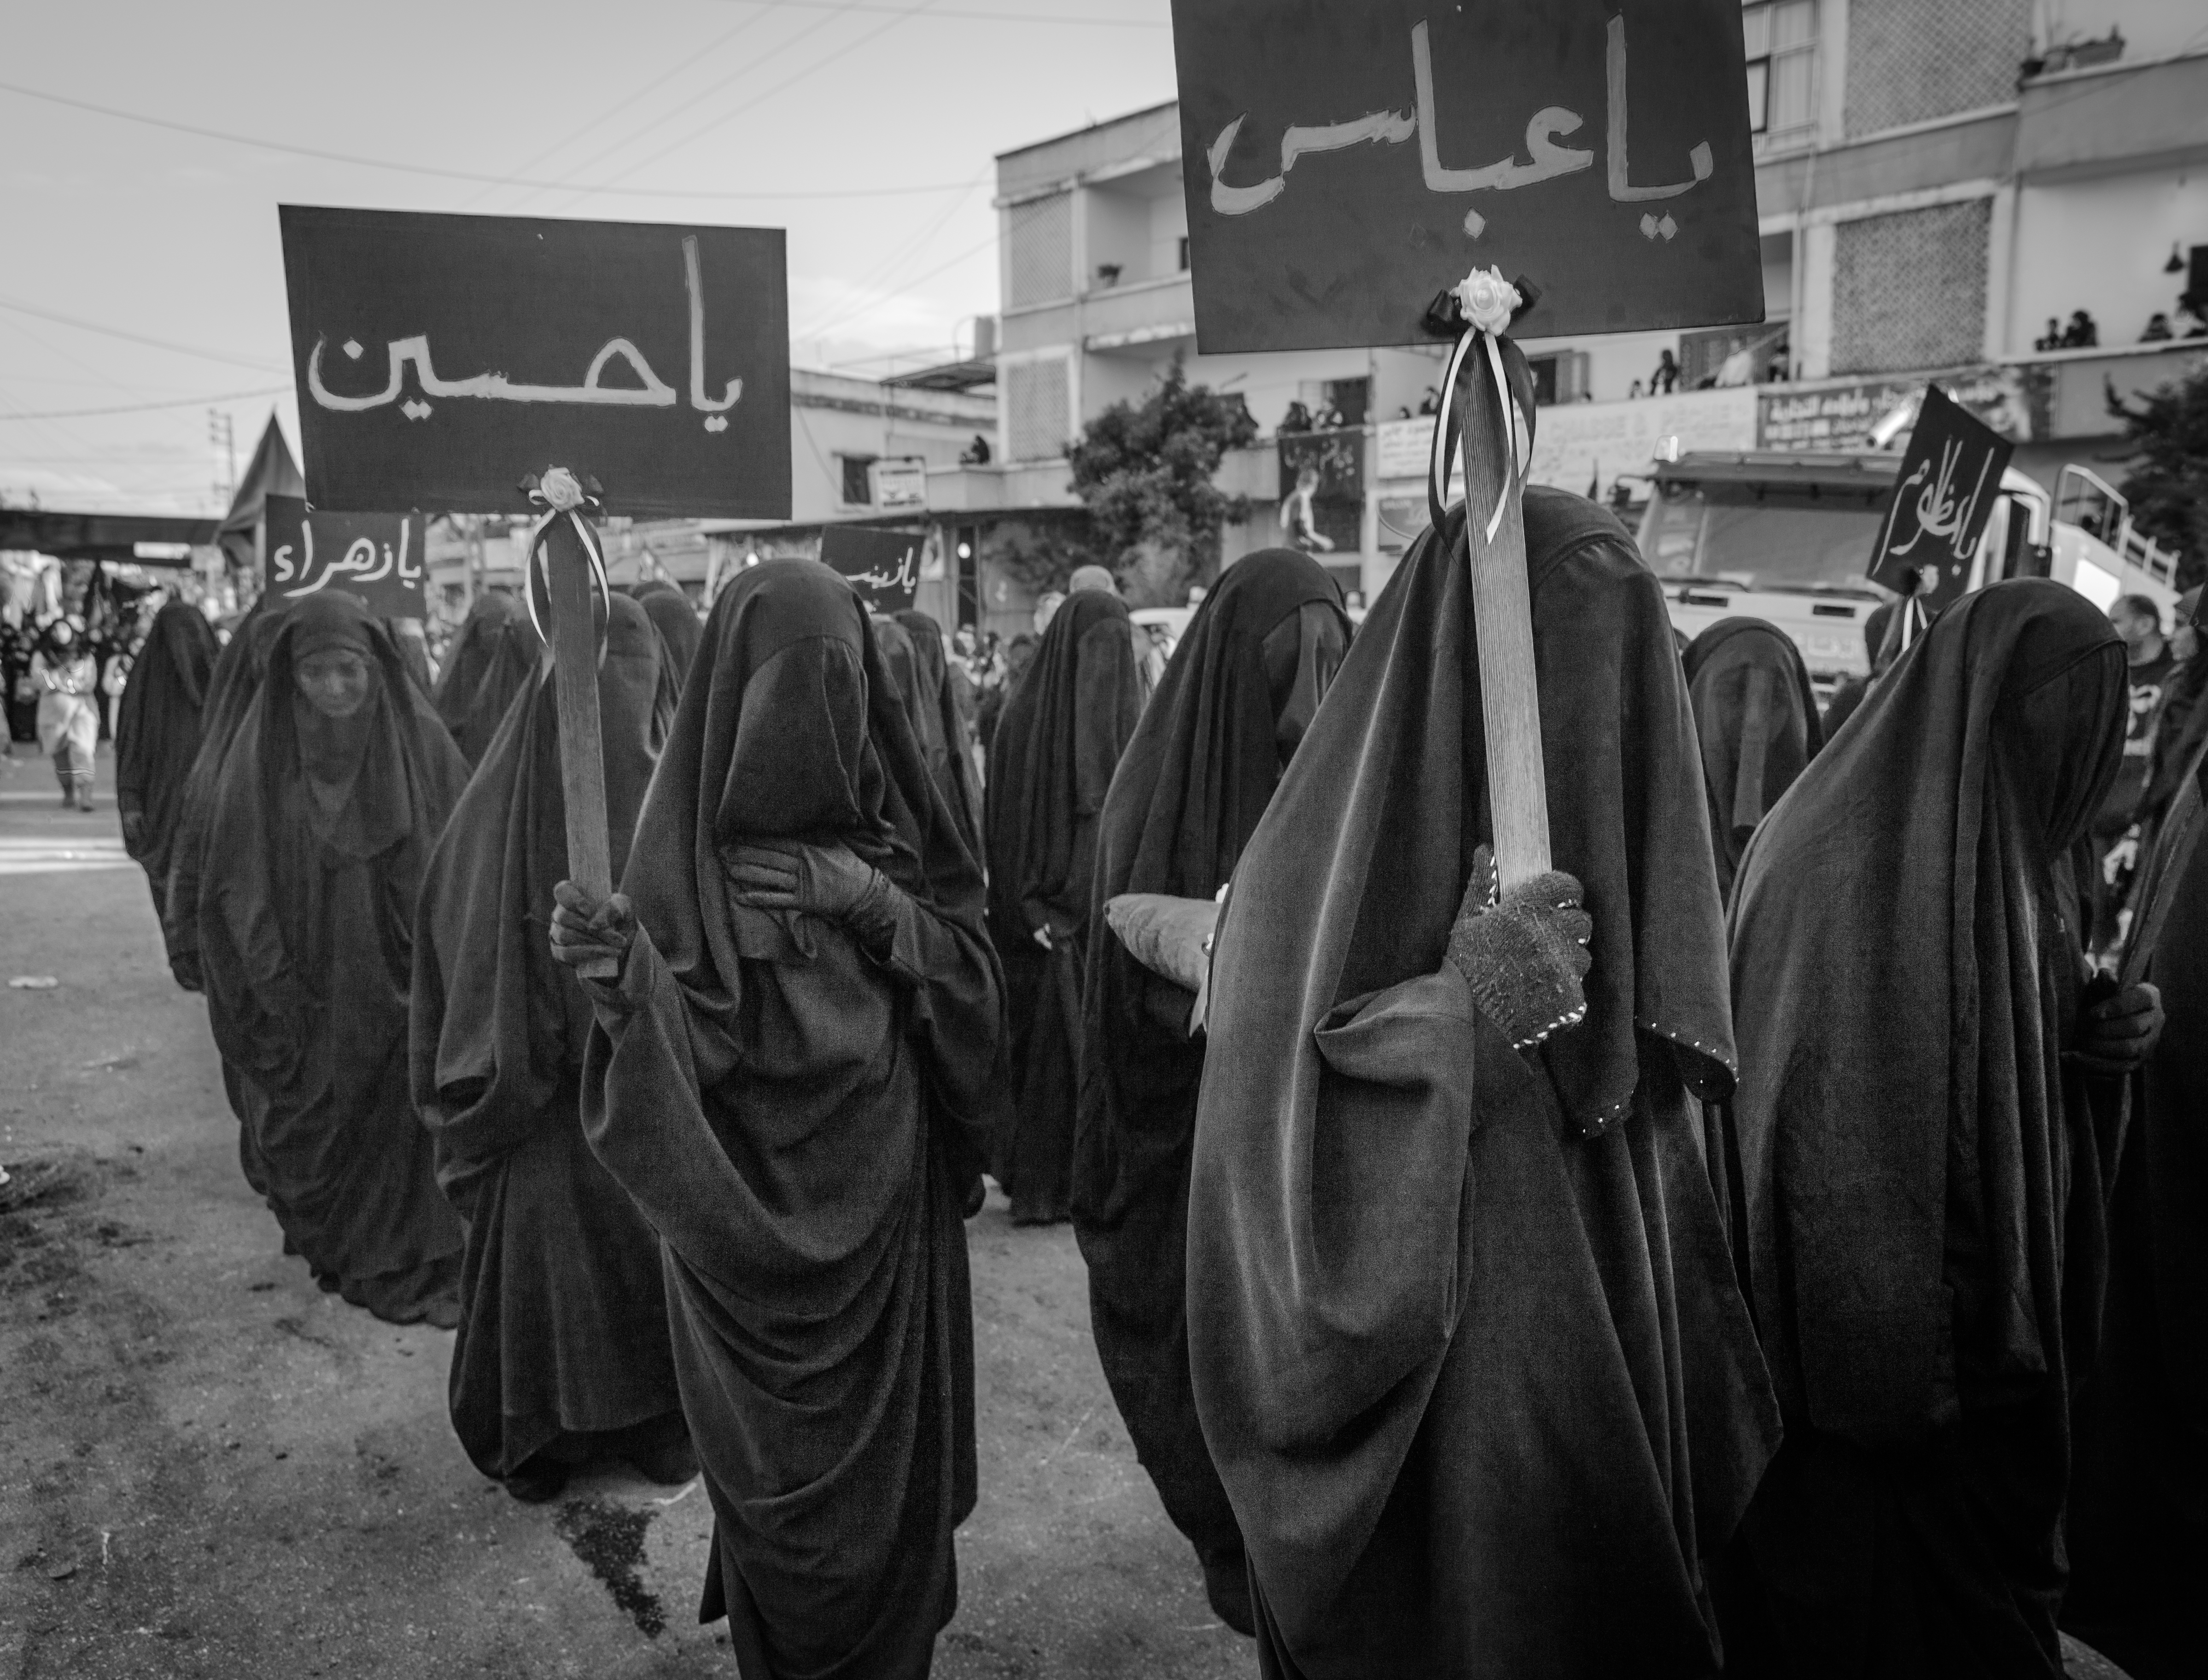 Veiled Shia women carry signs with the names of Ali and Hussein through the streets of Nabatiyeh, Lebanon, November 2014 (photo: Maya Hautefeuille)